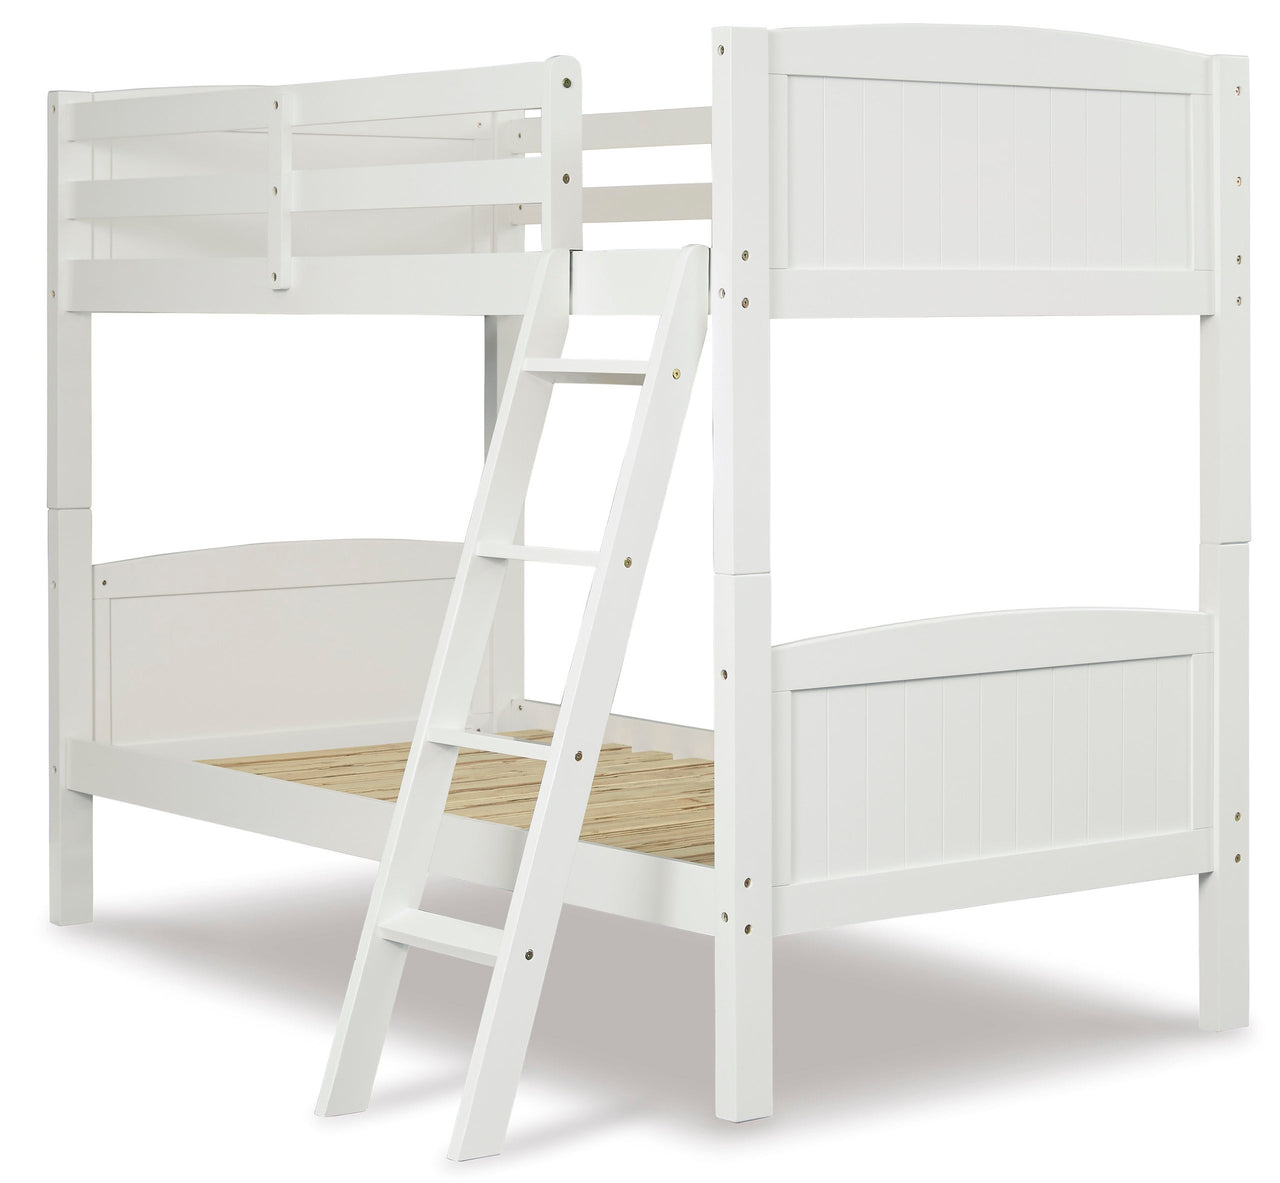 B502 TWIN/TWIN BUNK BED ***NEW ARRIVAL***